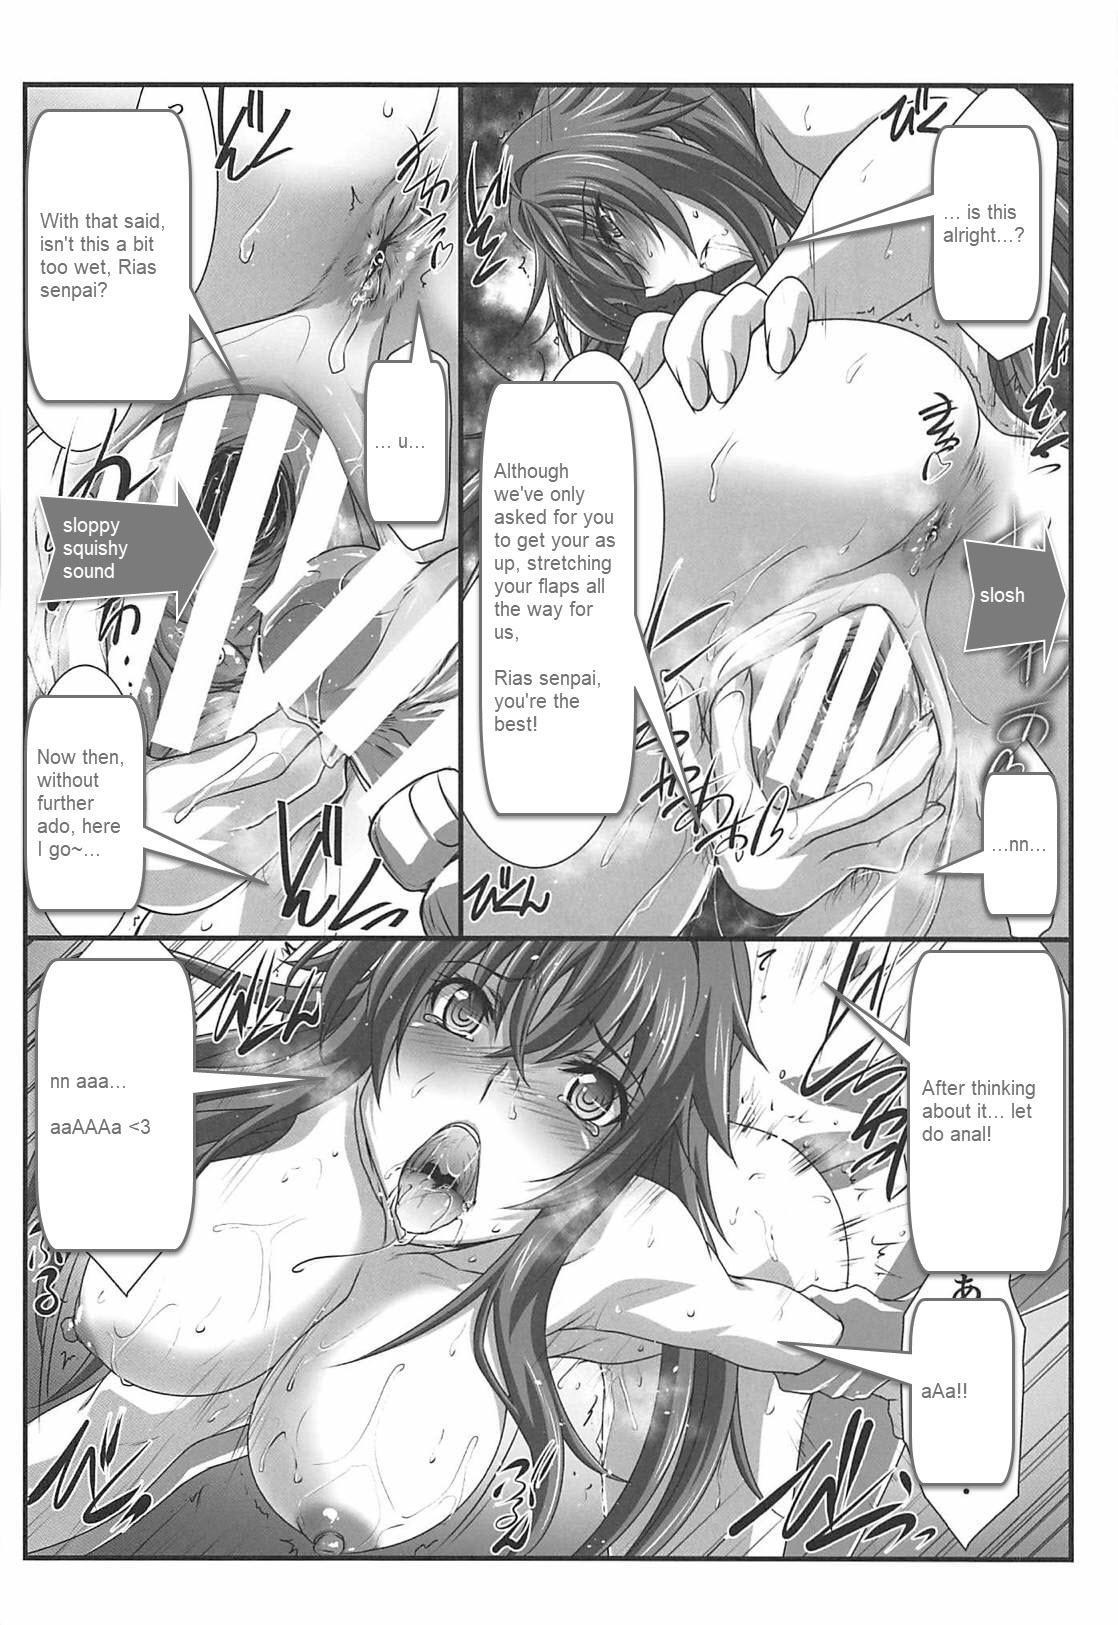 Office Fuck SPIRAL ZONE DxD II - Highschool dxd Pervs - Page 11